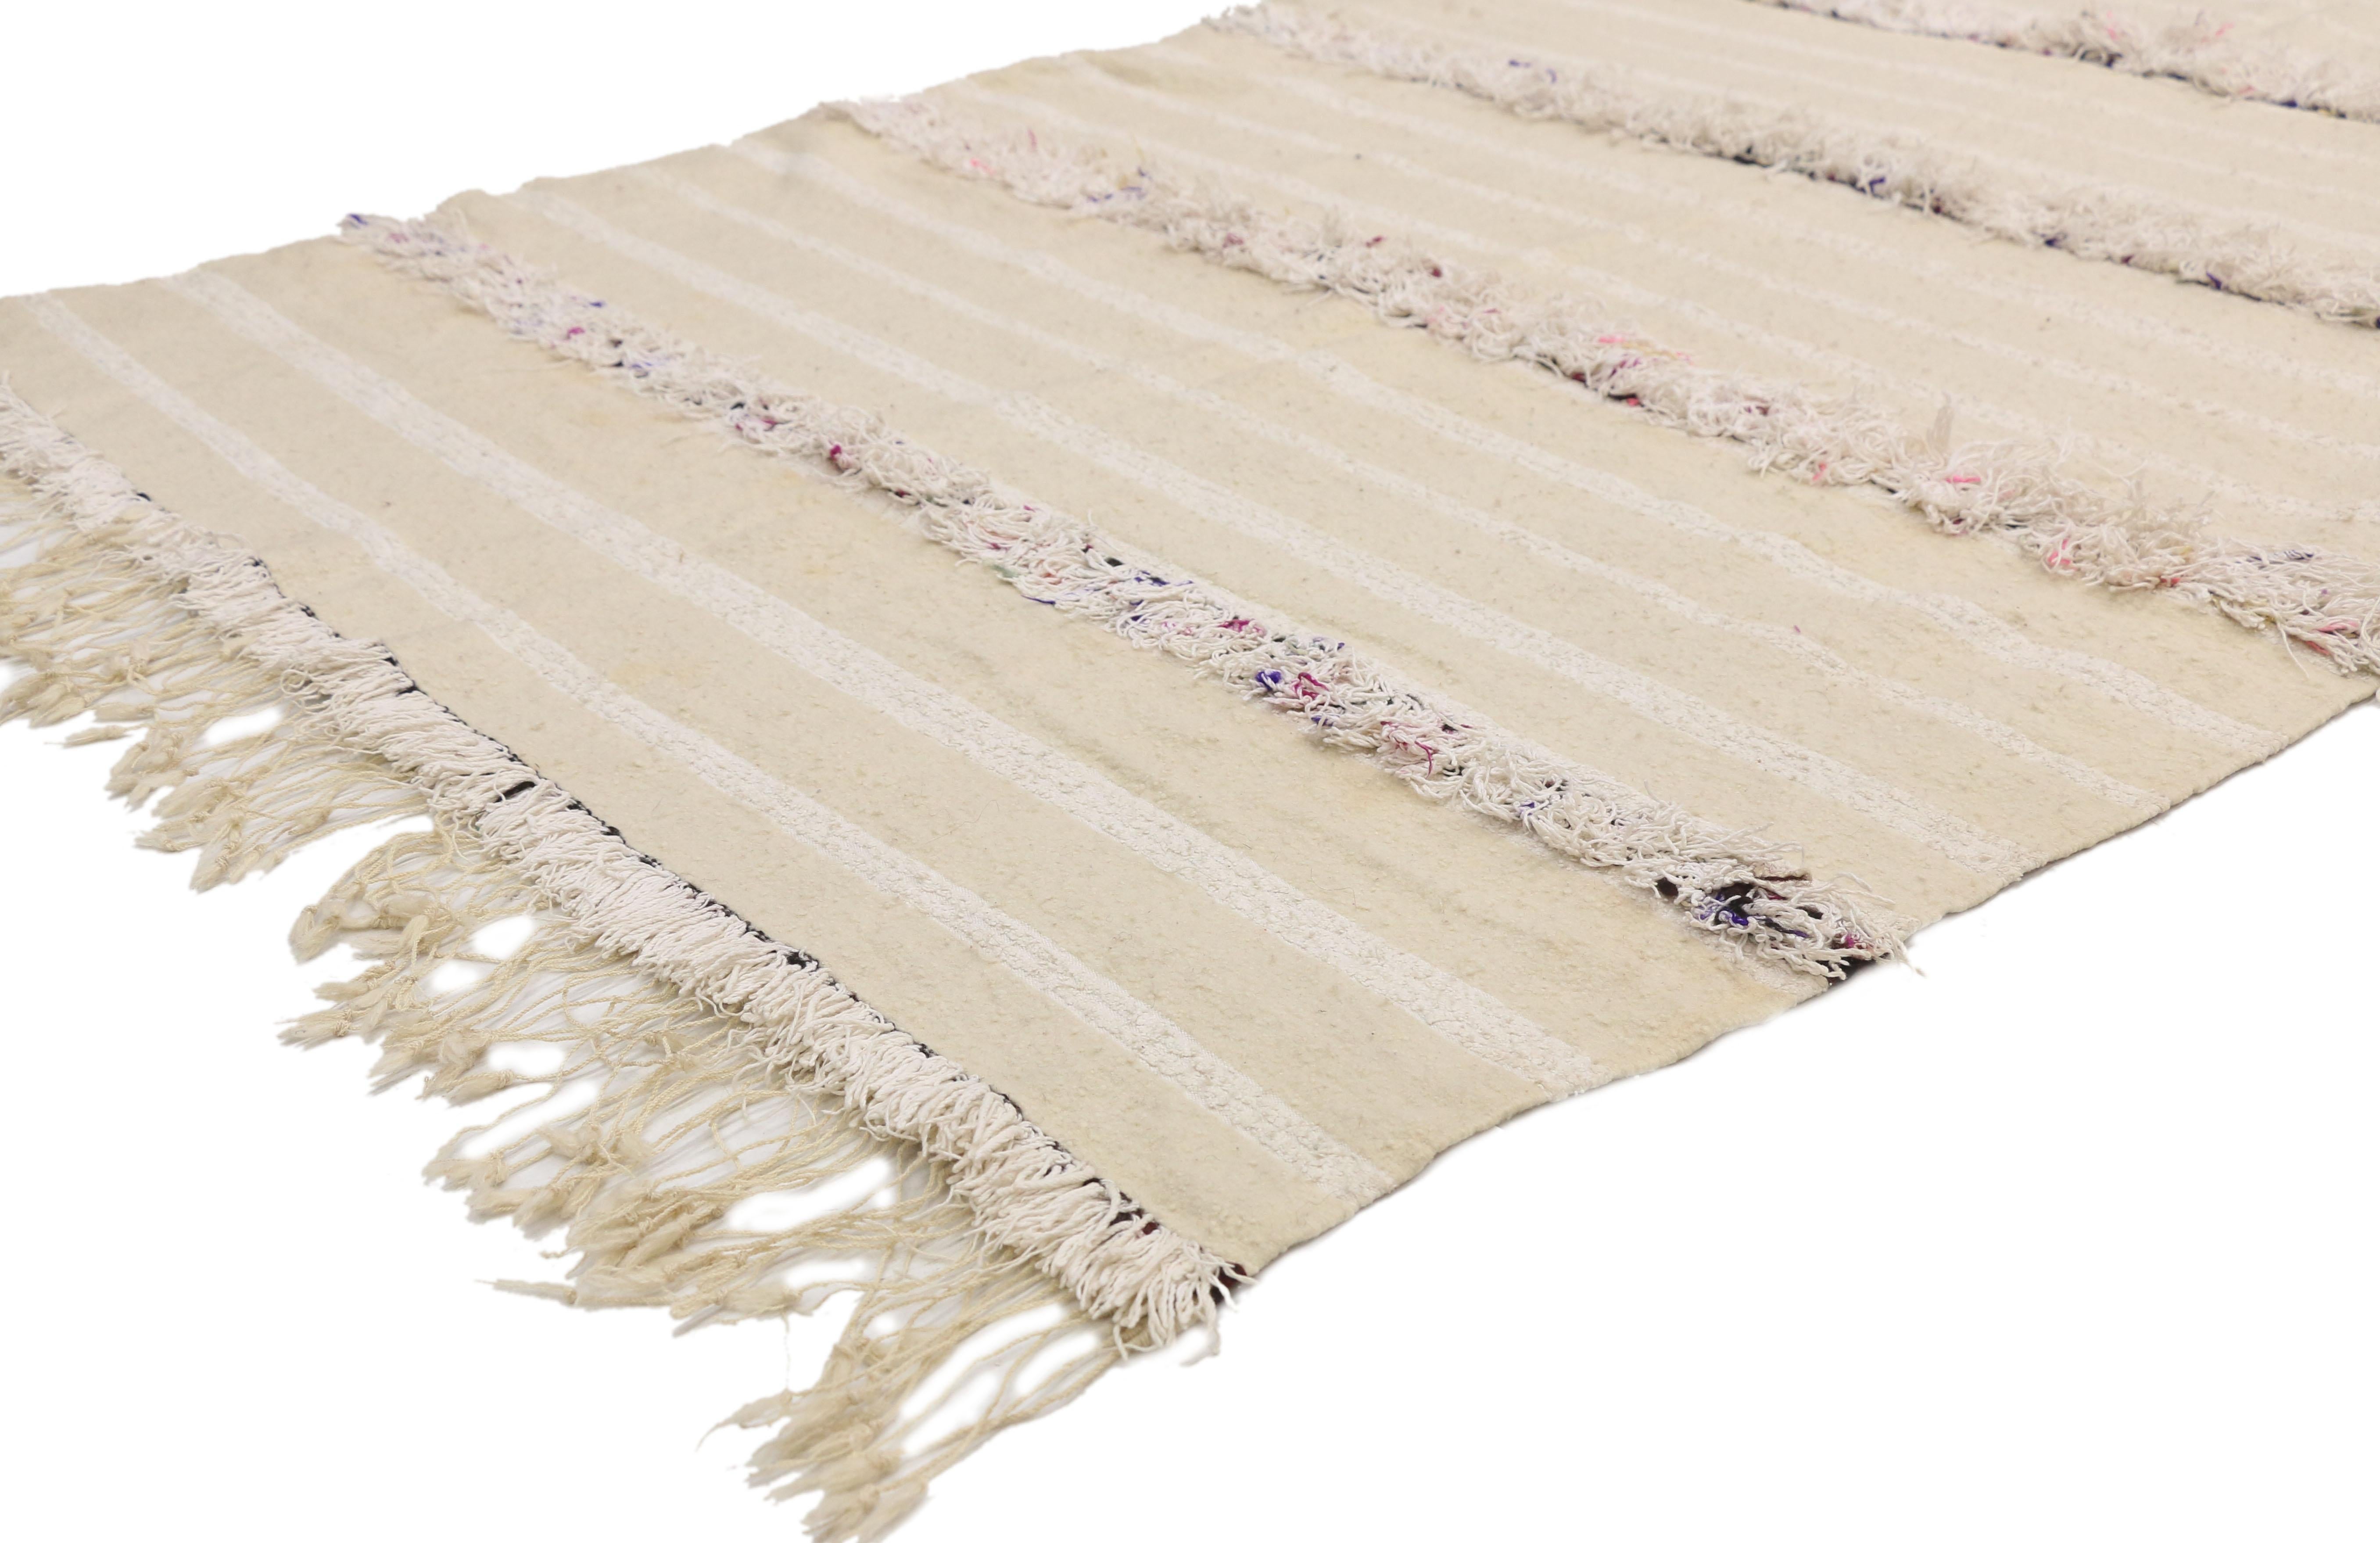 20825, vintage Moroccan wedding blanket, Berber Handira Tamizart. This handwoven wool vintage Moroccan wedding blanket also known as a Berber Handira features rows of fluffy fringe embellished with accent colors. The underside of this vintage